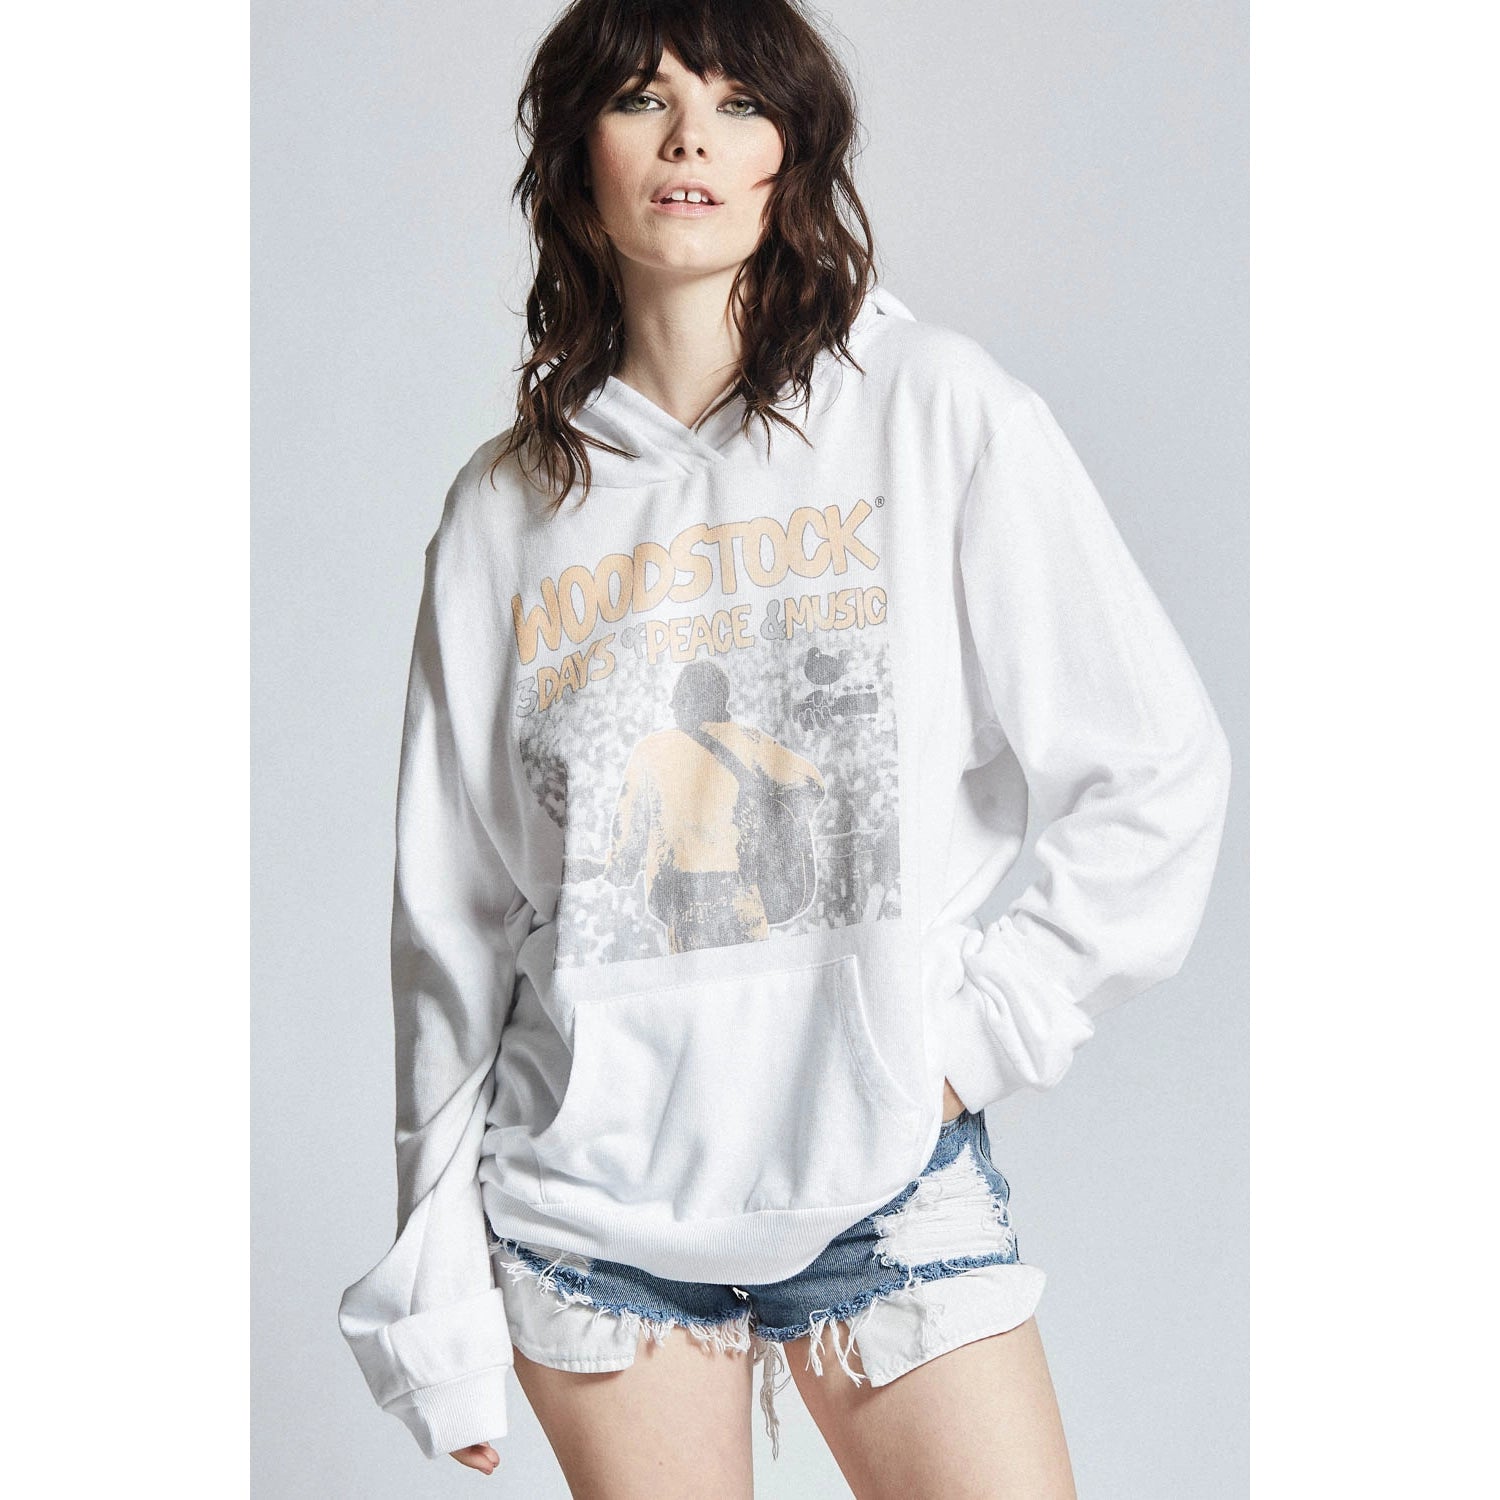 Recycled Karma Woodstock Peace Ls Hoodie - White available at The Good Life Boutique